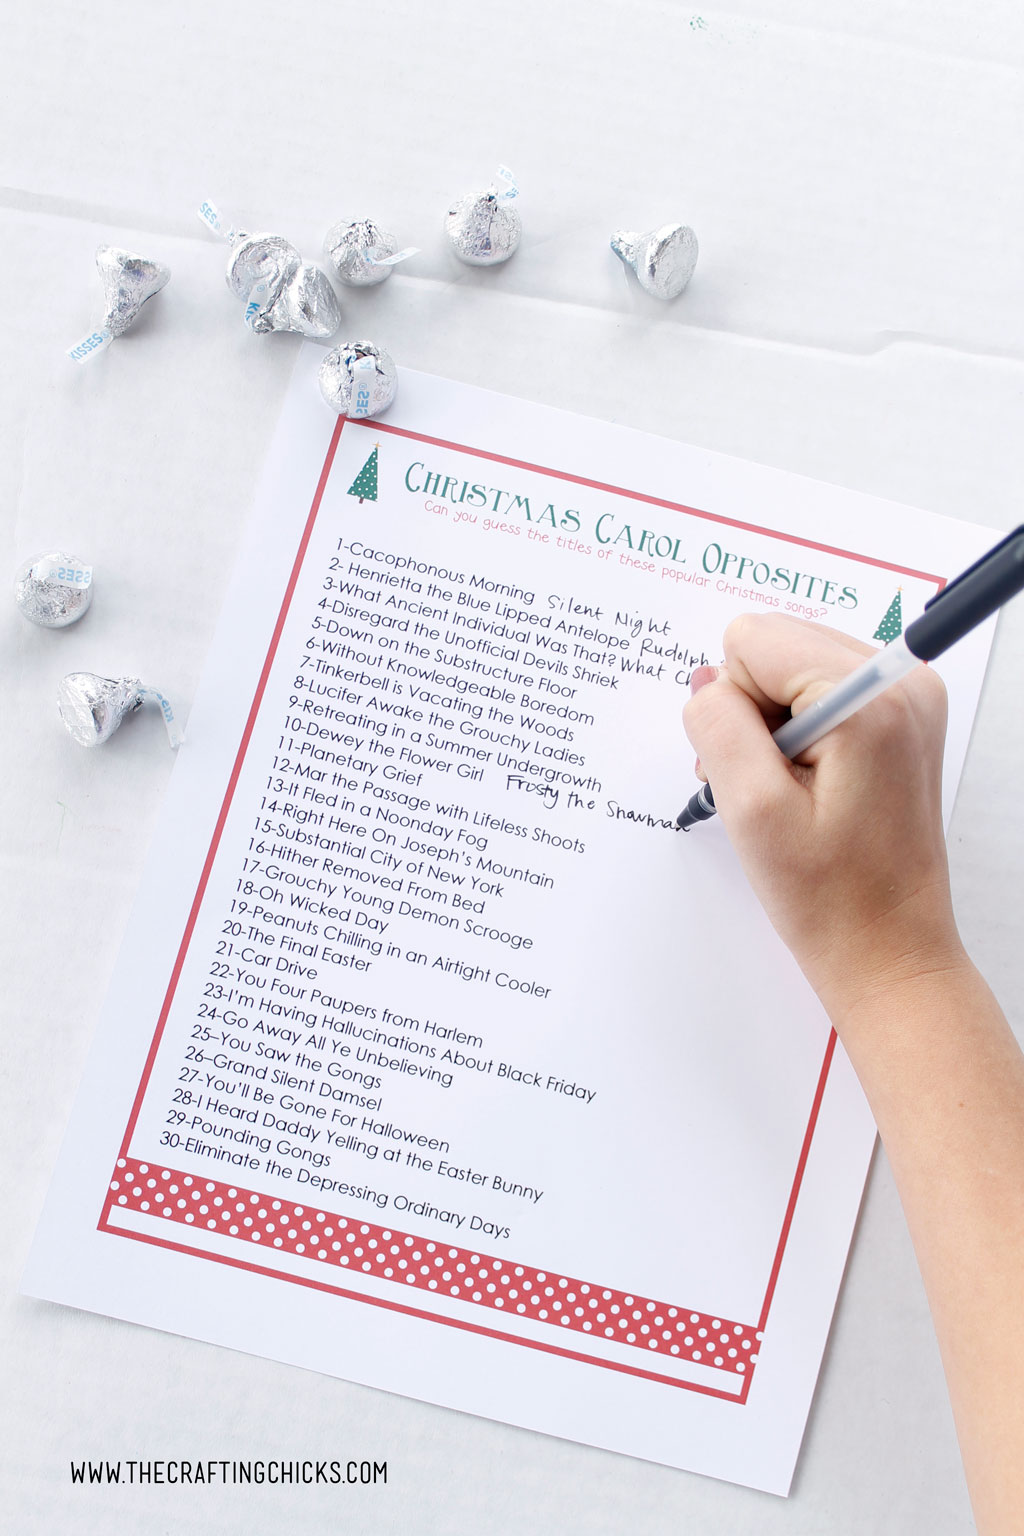 Christmas Carol Opposites free printable with hand writing answer in black pen.